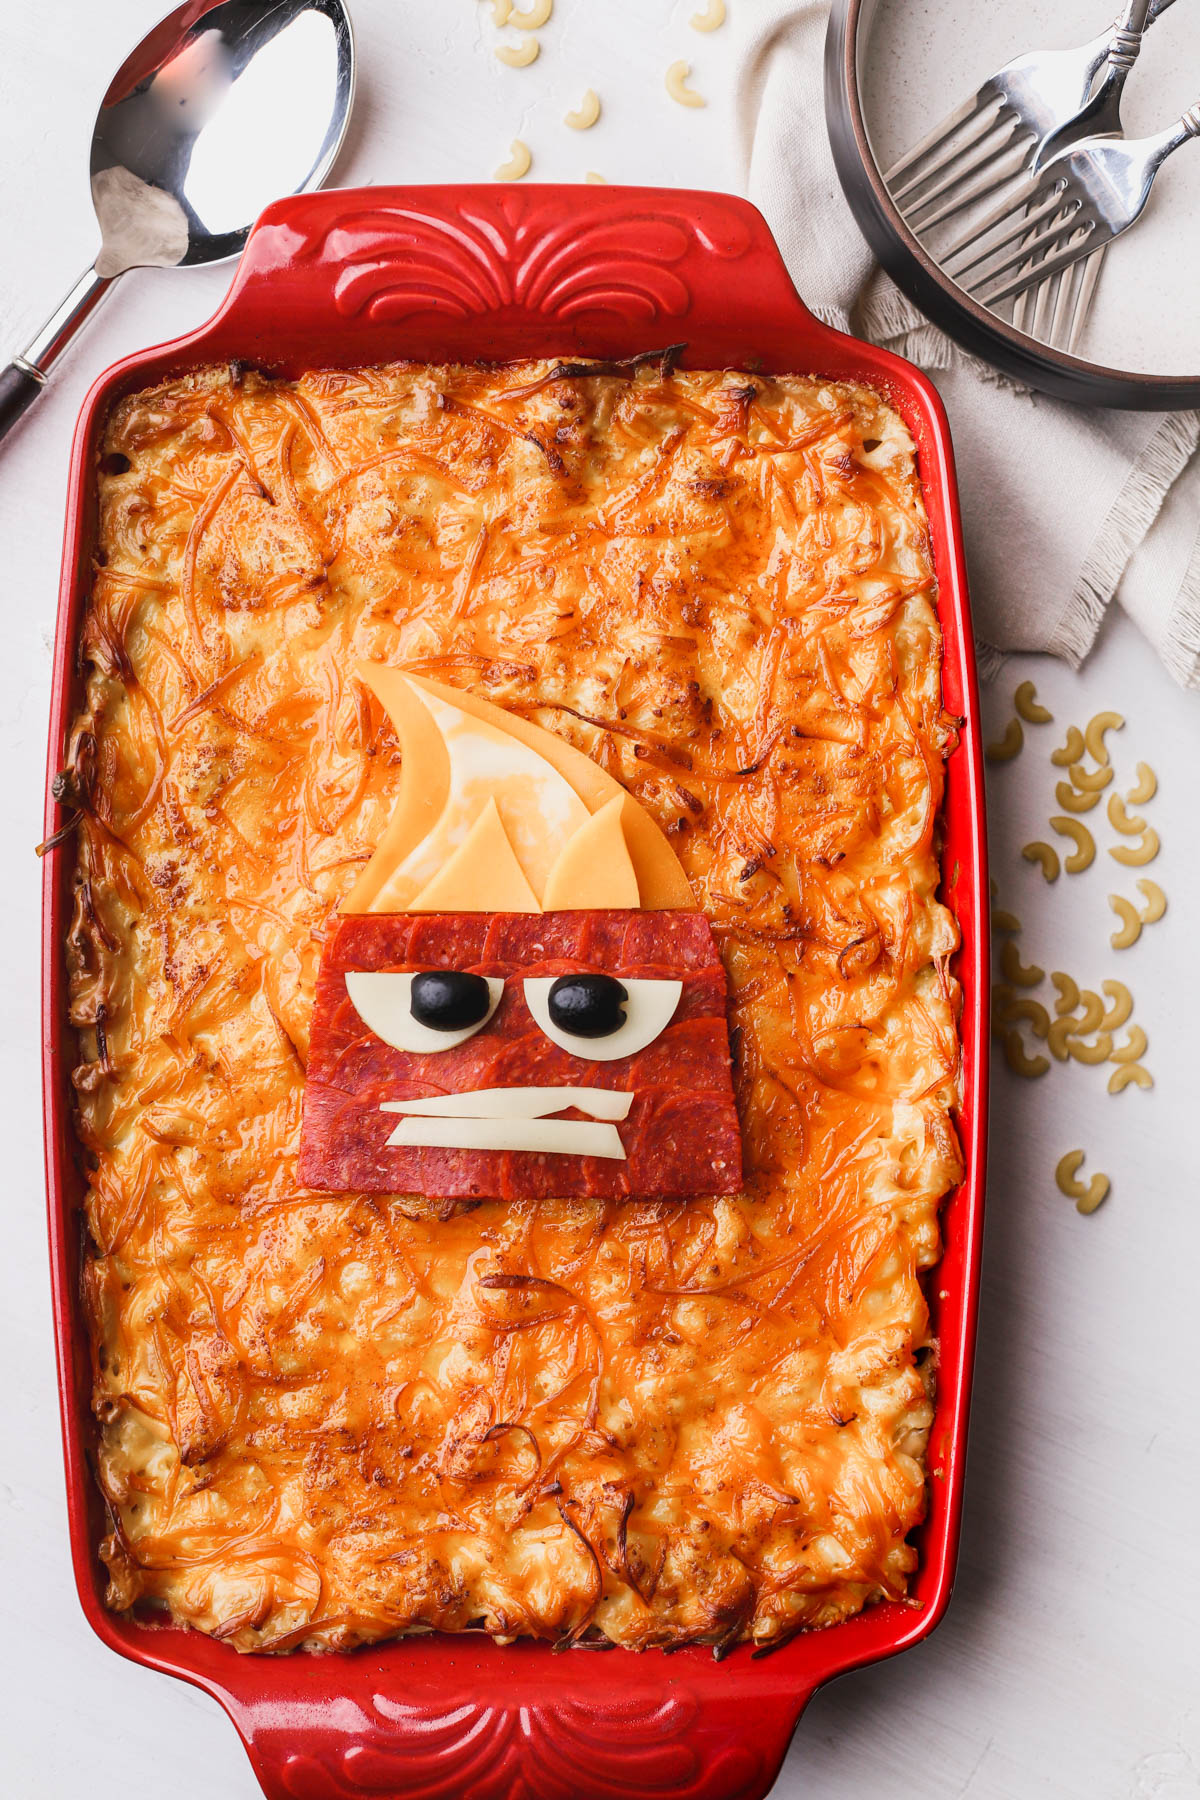 Smoked macaroni and cheese inspired by Disney's Inside Out "Anger" character.  